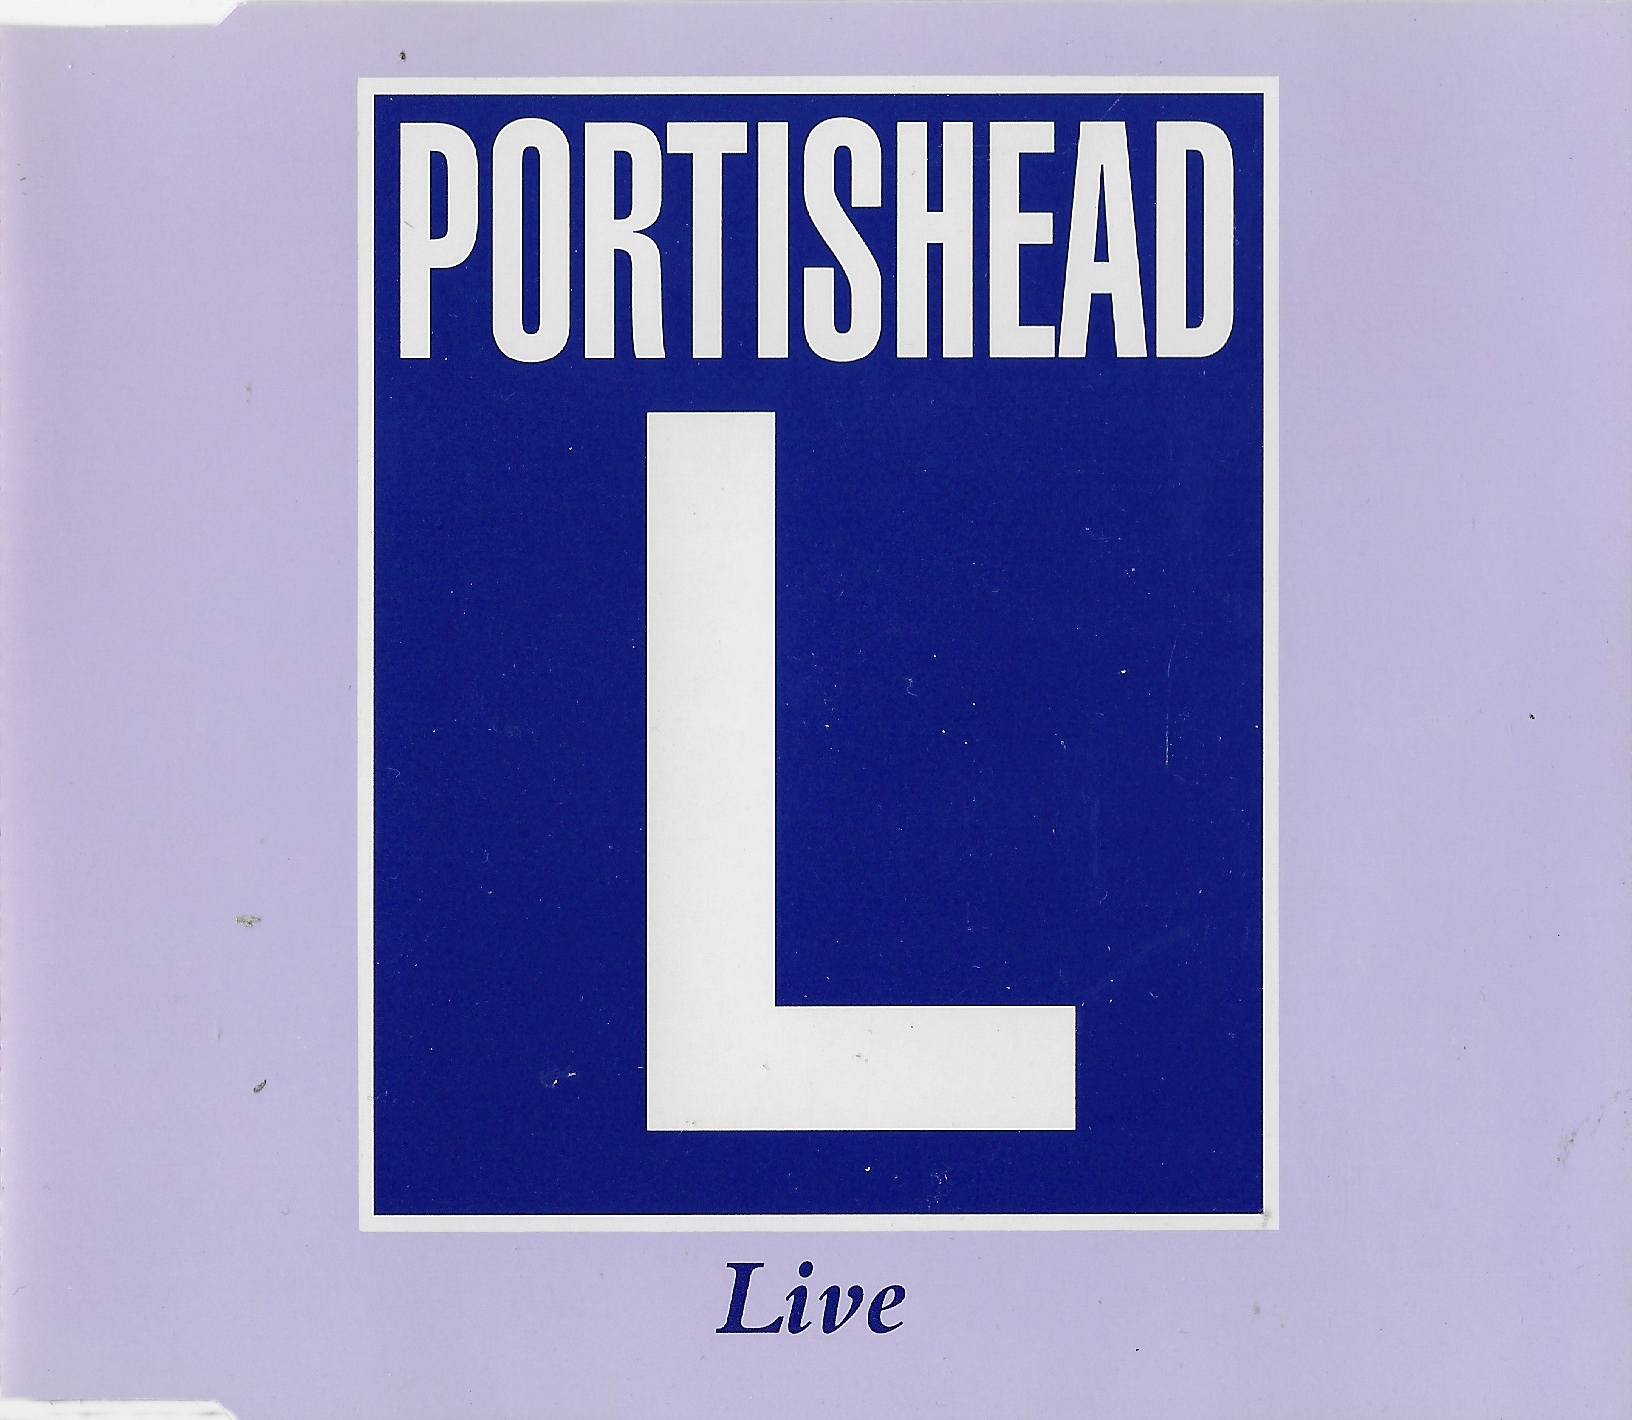 Picture of Portishead live by artist Portishead  